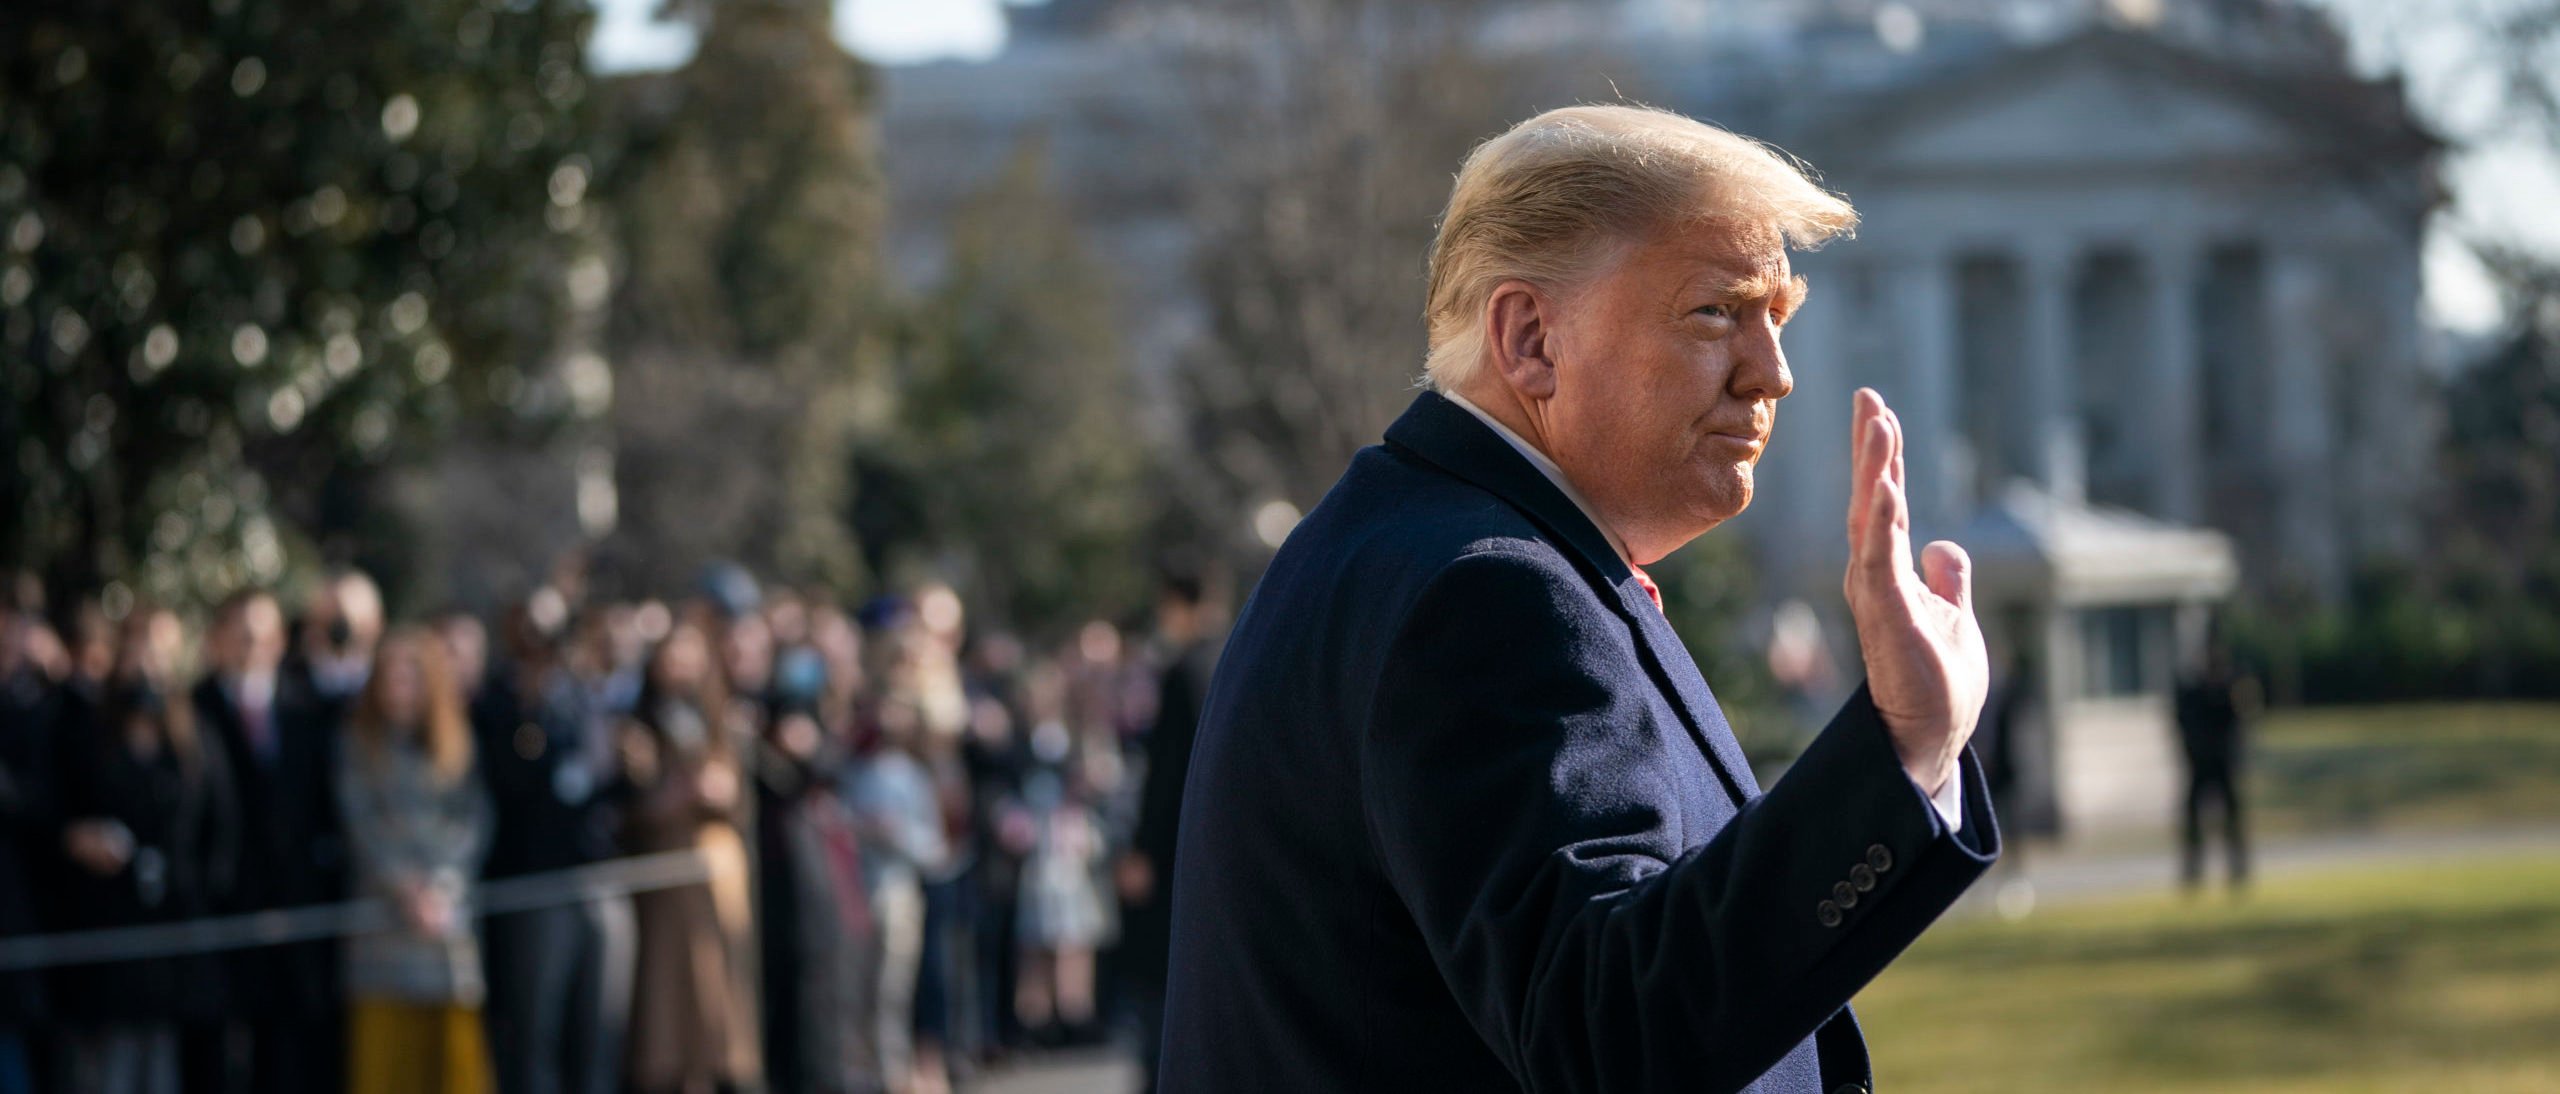 WASHINGTON, DC - JANUARY 12: U.S. President Donald Trump waves as he walks to Marine One on the South Lawn of the White House on January 12, 2021 in Washington, DC. Following last week's deadly pro-Trump riot at the U.S. Capitol, President Trump is making his first public appearance with a trip to the town of Alamo, Texas to view the construction of the wall along the U.S.-Mexico border. (Photo by Drew Angerer/Getty Images)